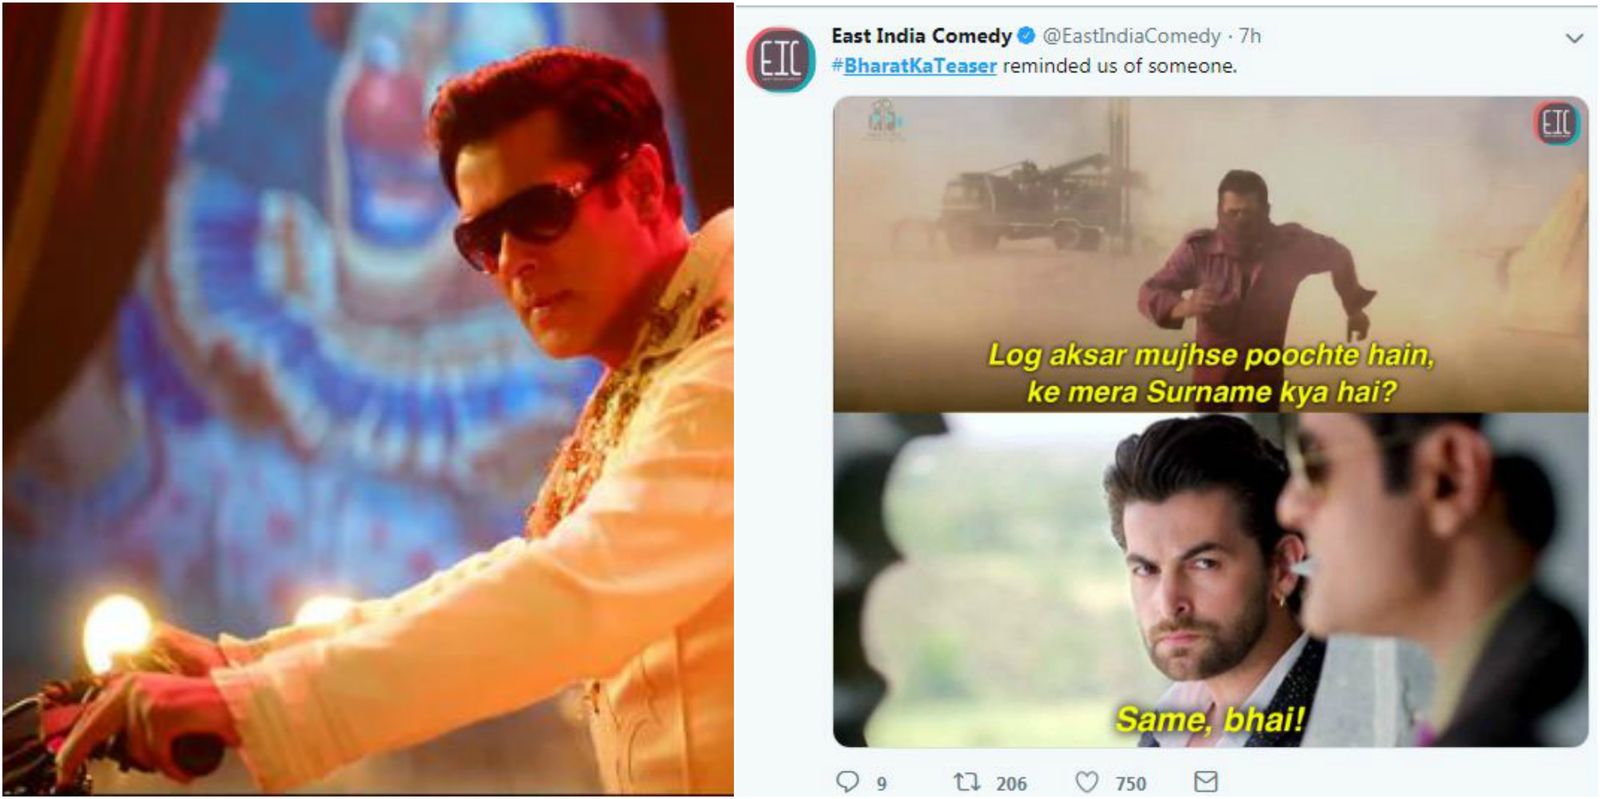 Bharat Teaser Proves To Be A Gold Mine For Memesters On Twitter